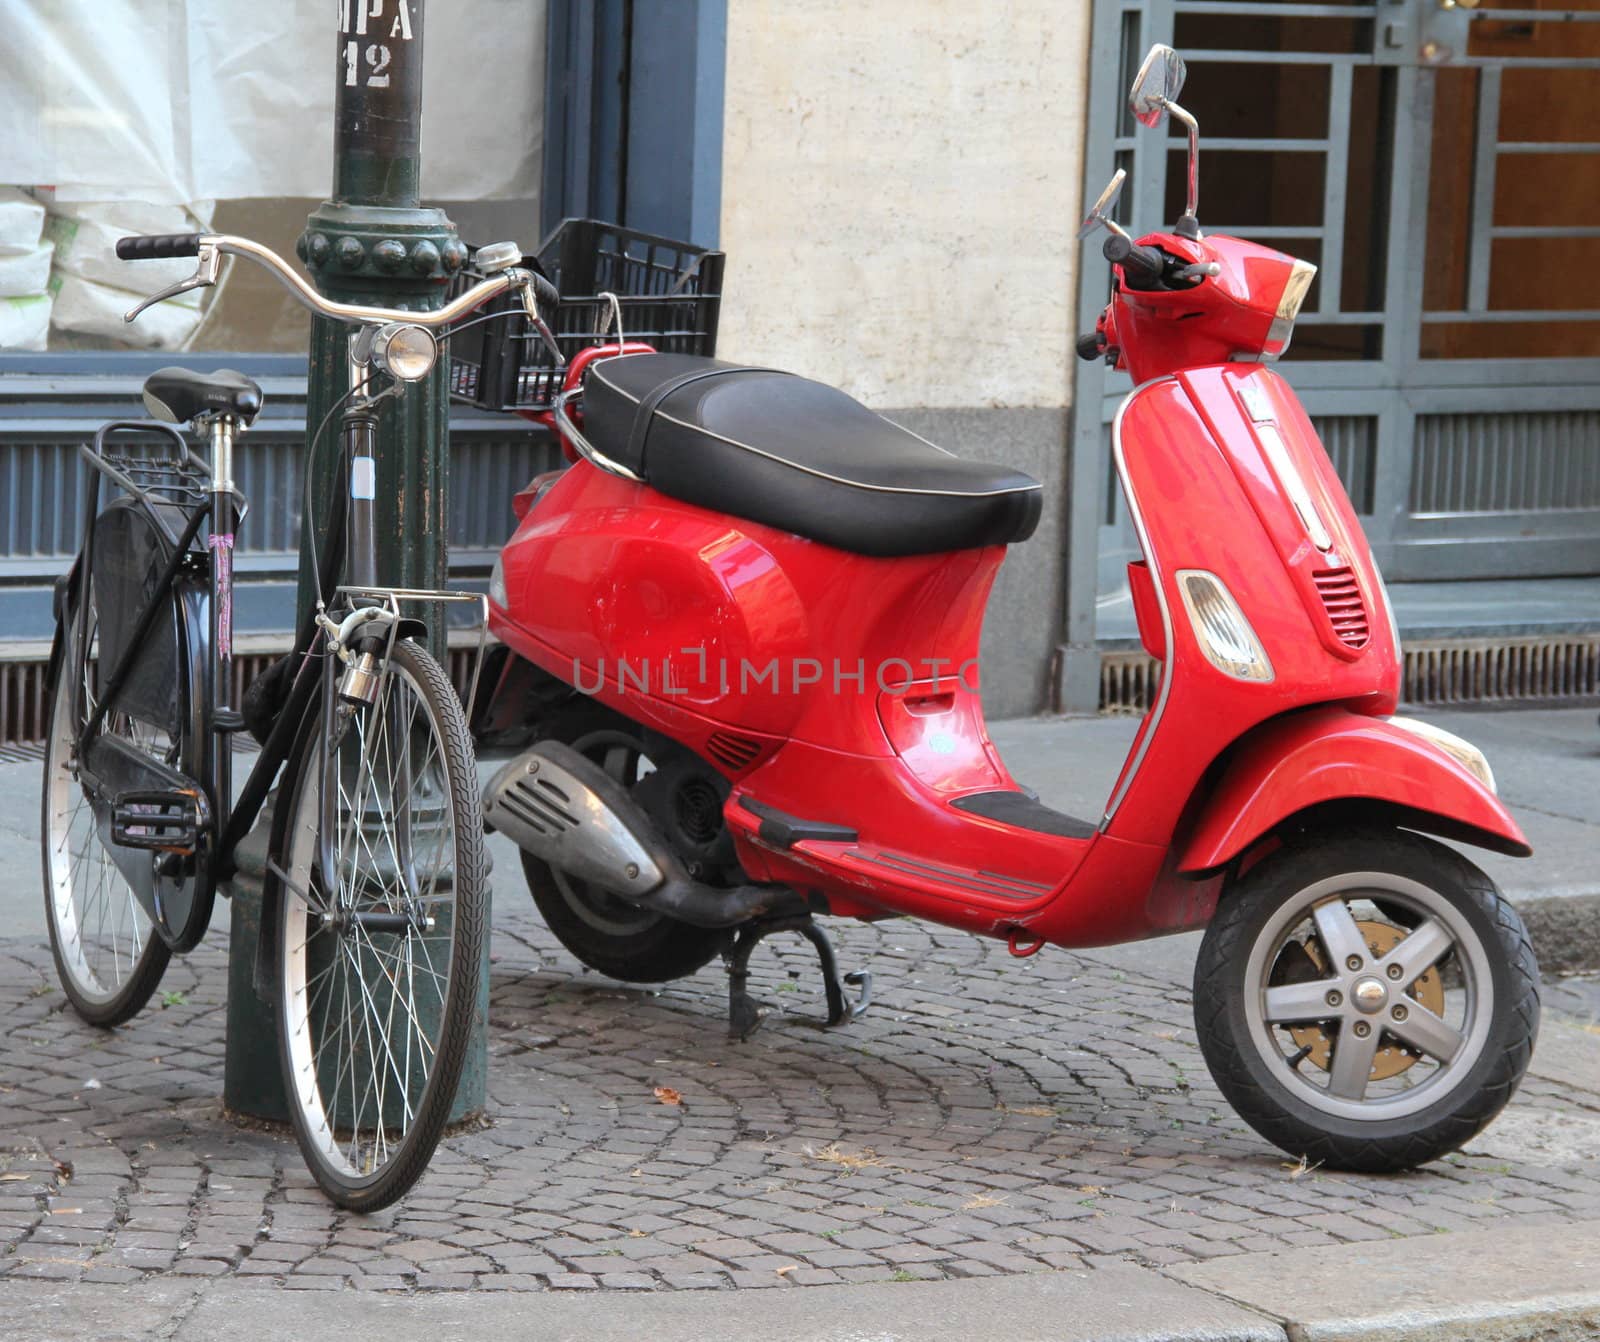 Classical scooter, red, bicicle, street, pavement, wheel, Vespa, Turin, Italy